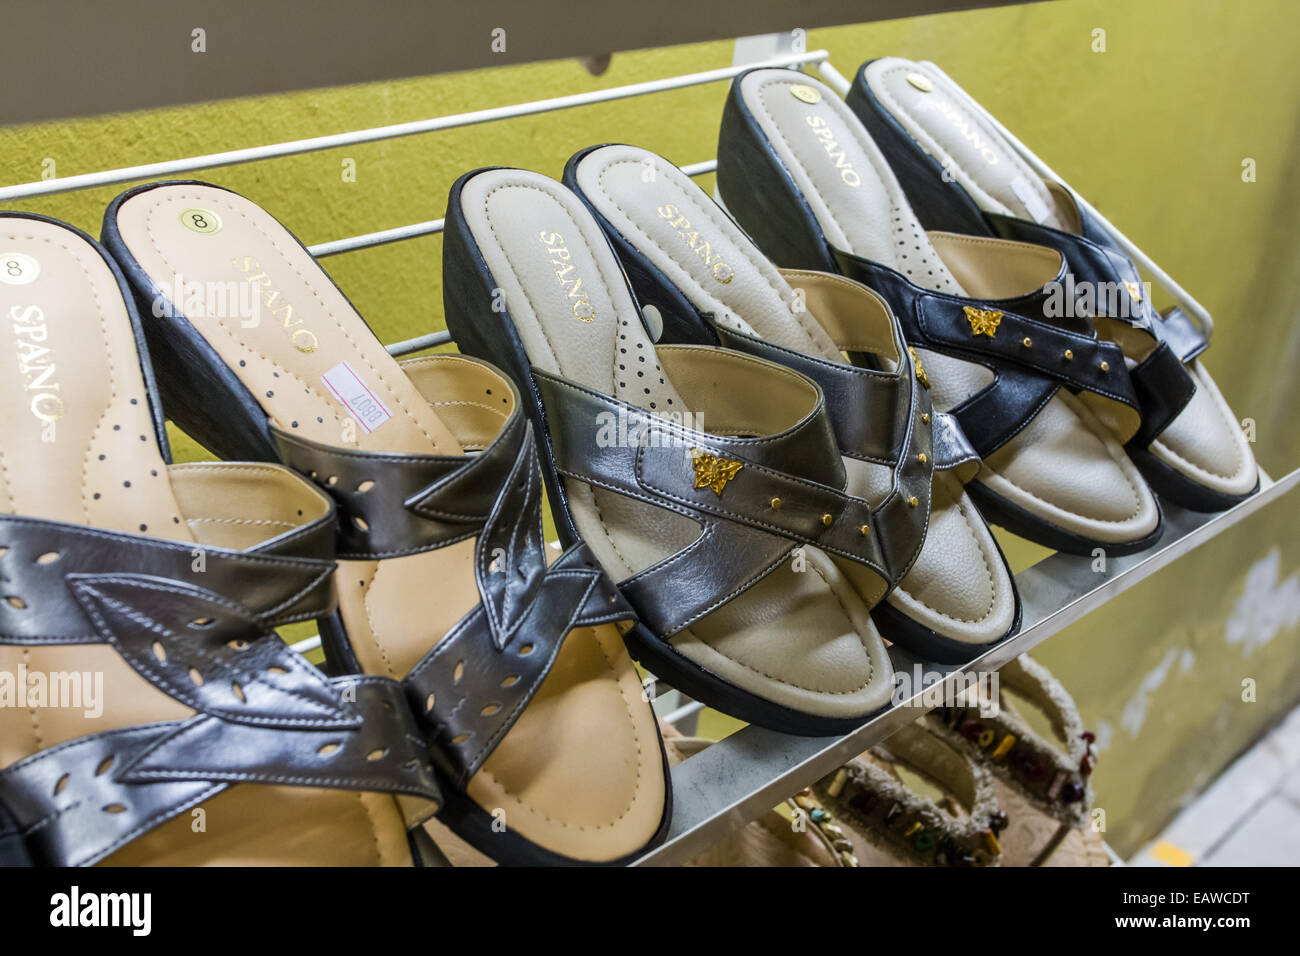 Shoes on display in shopping mall Stock Photo - Alamy